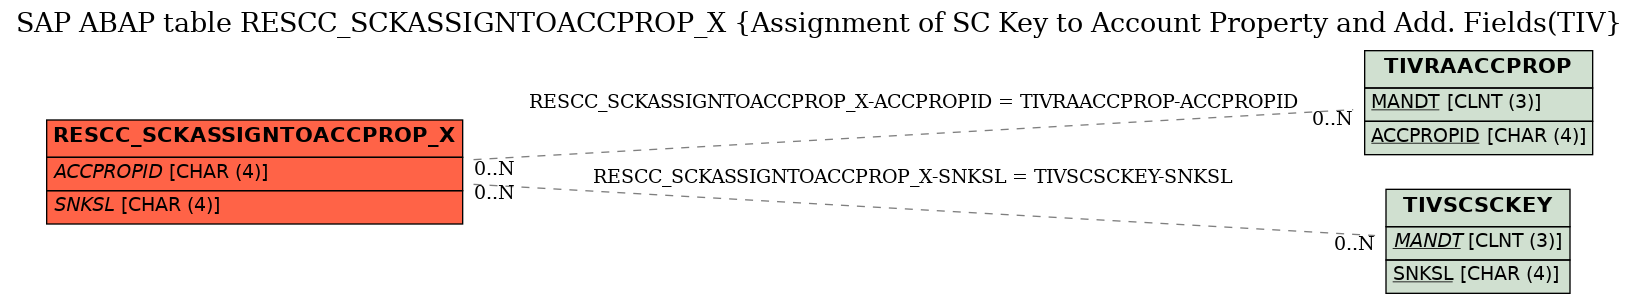 E-R Diagram for table RESCC_SCKASSIGNTOACCPROP_X (Assignment of SC Key to Account Property and Add. Fields(TIV)